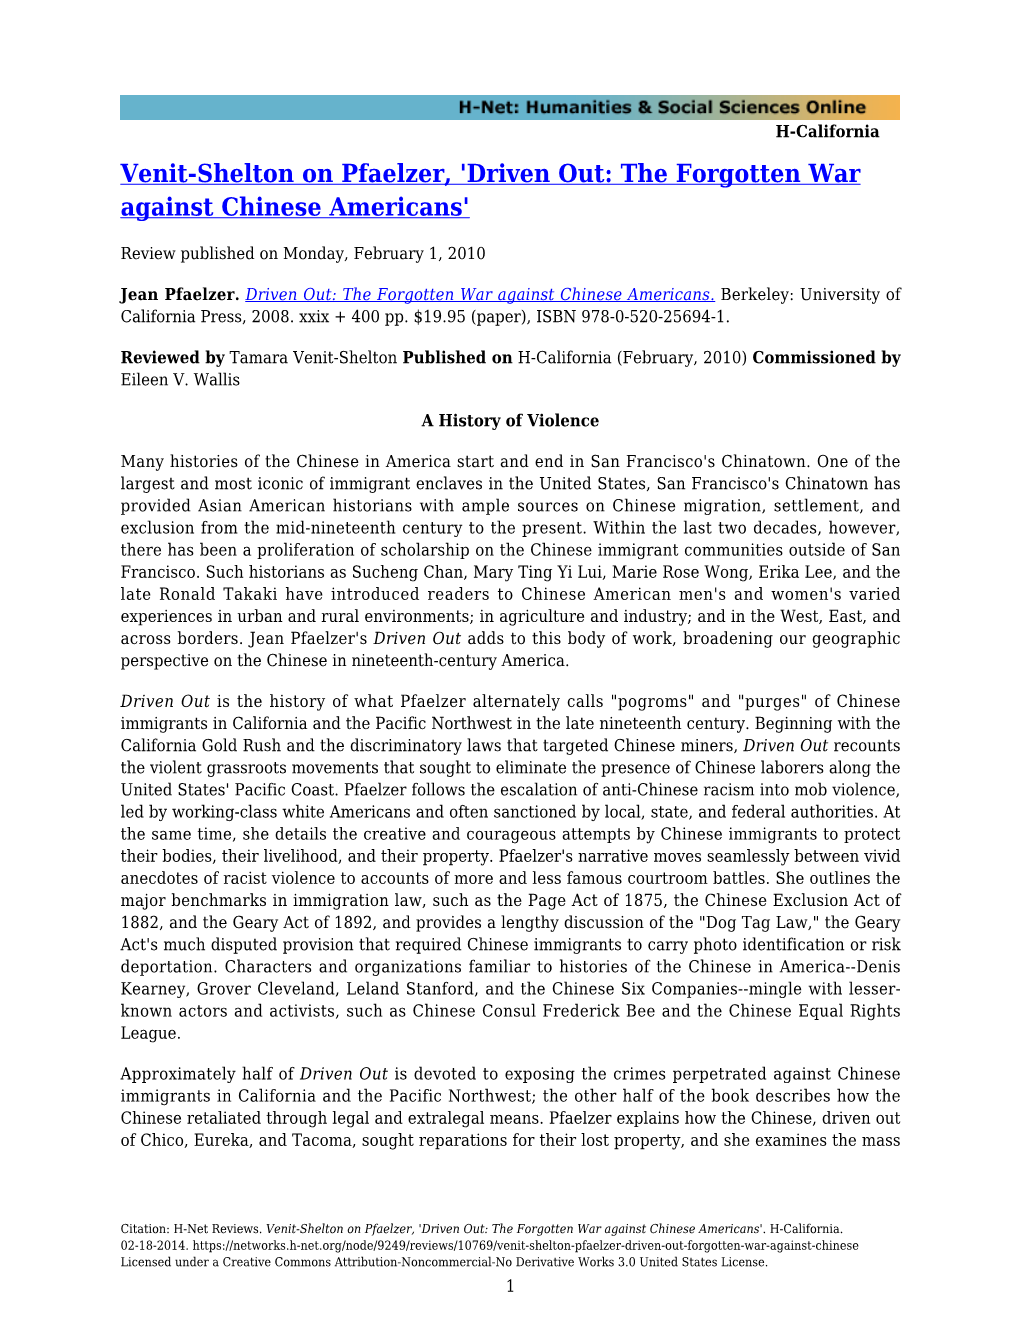 Venit-Shelton on Pfaelzer, 'Driven Out: the Forgotten War Against Chinese Americans'